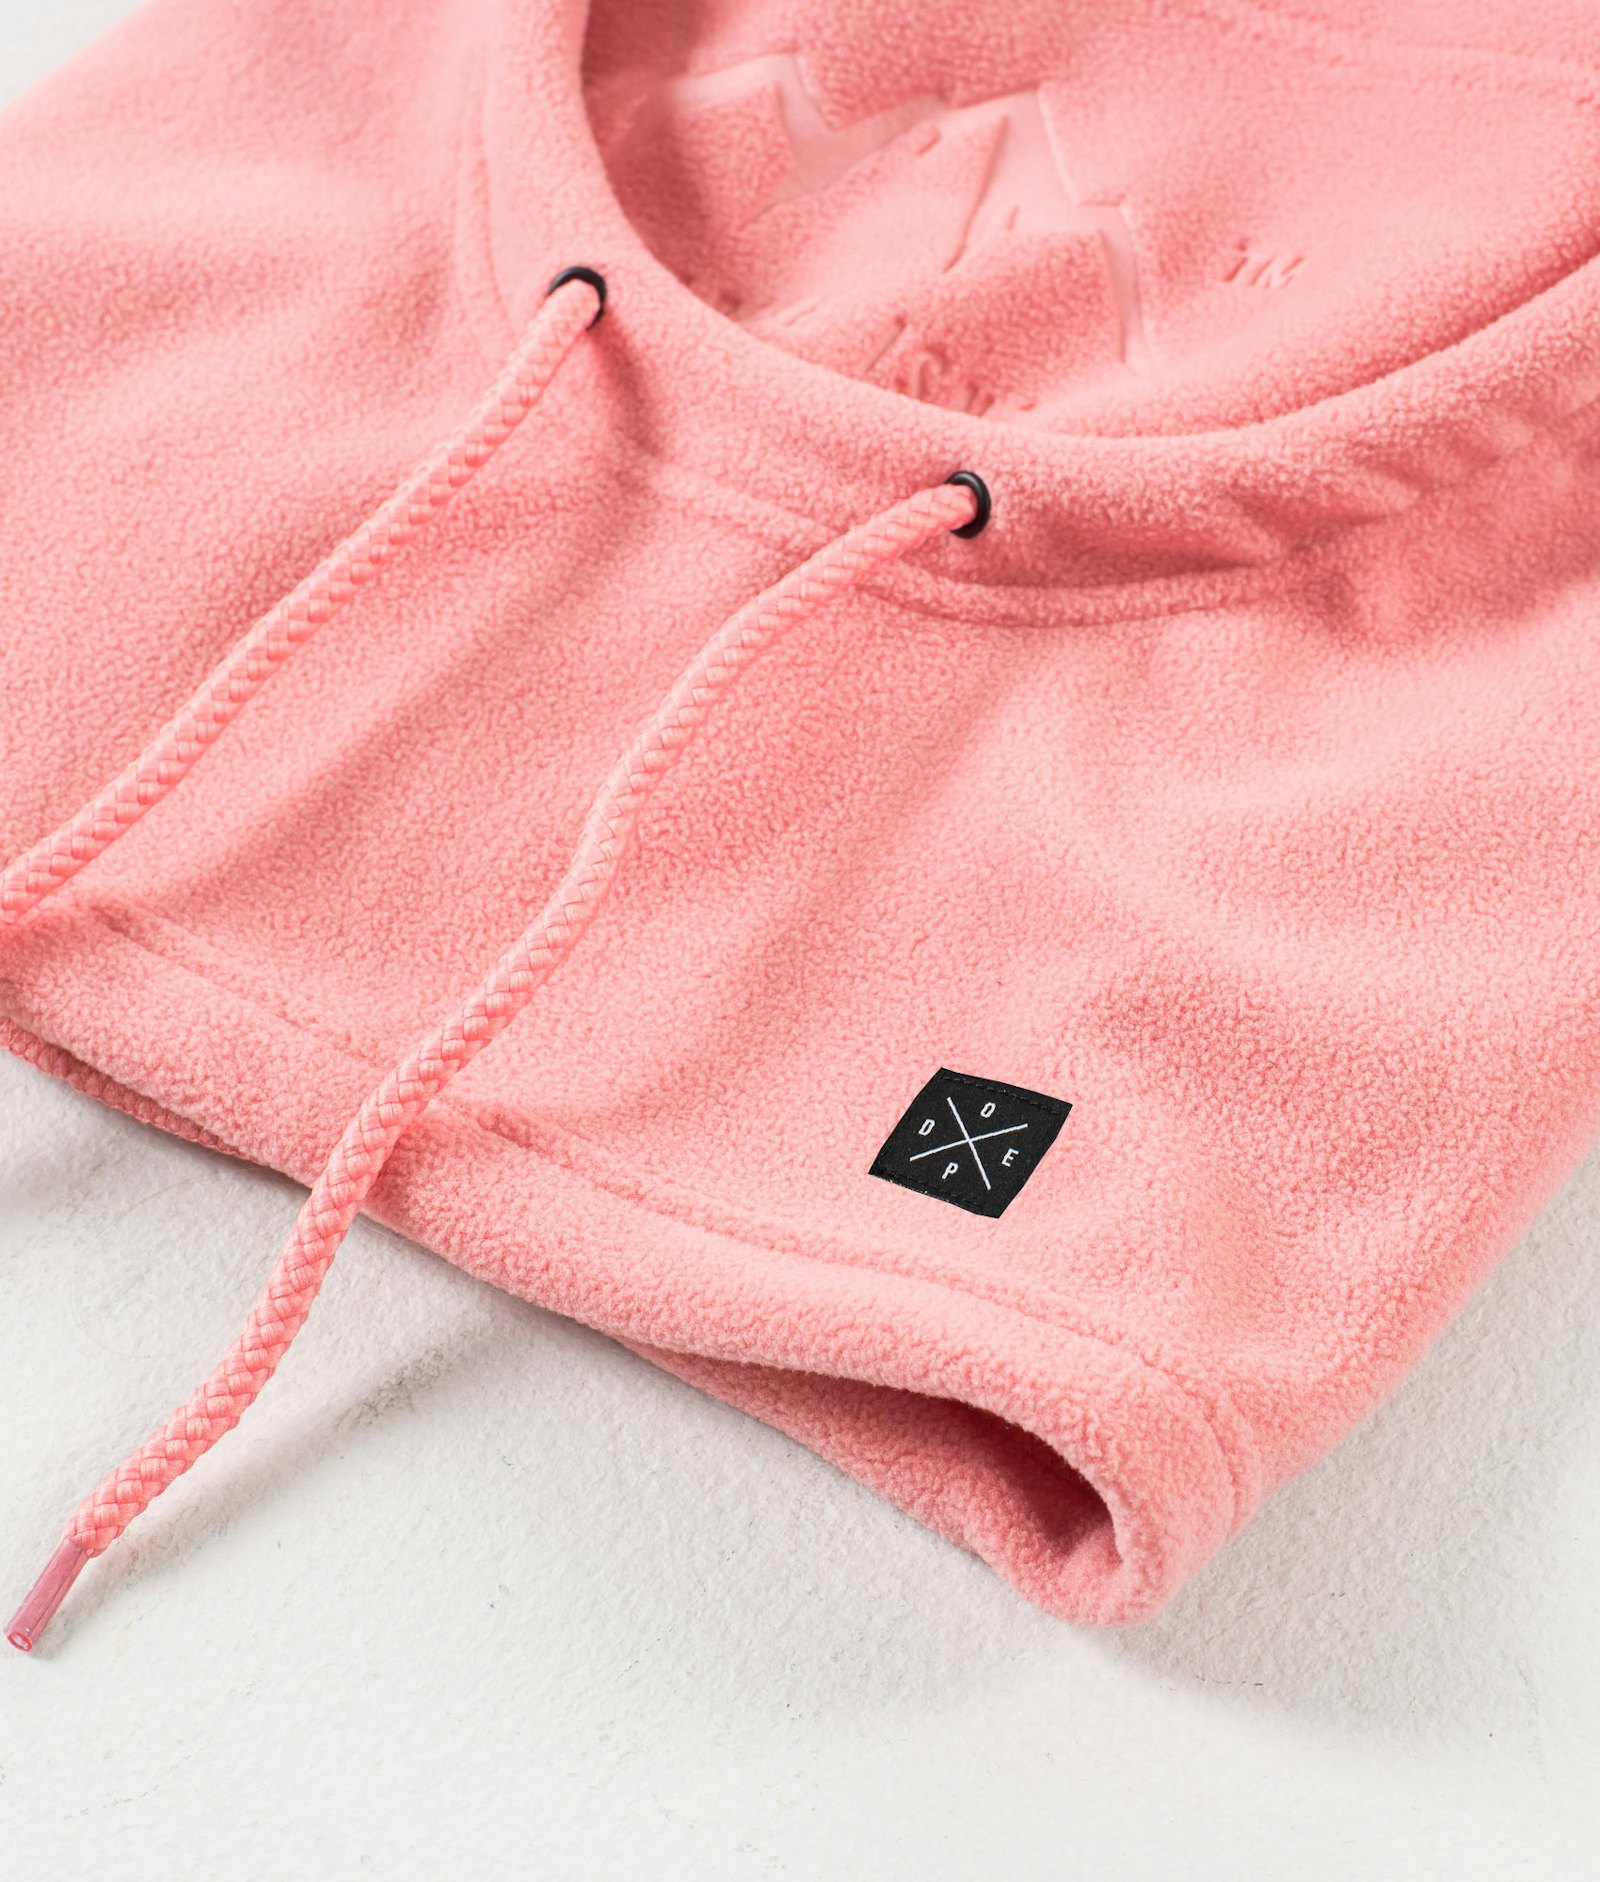 Dope Cozy Hood Facemask Pink